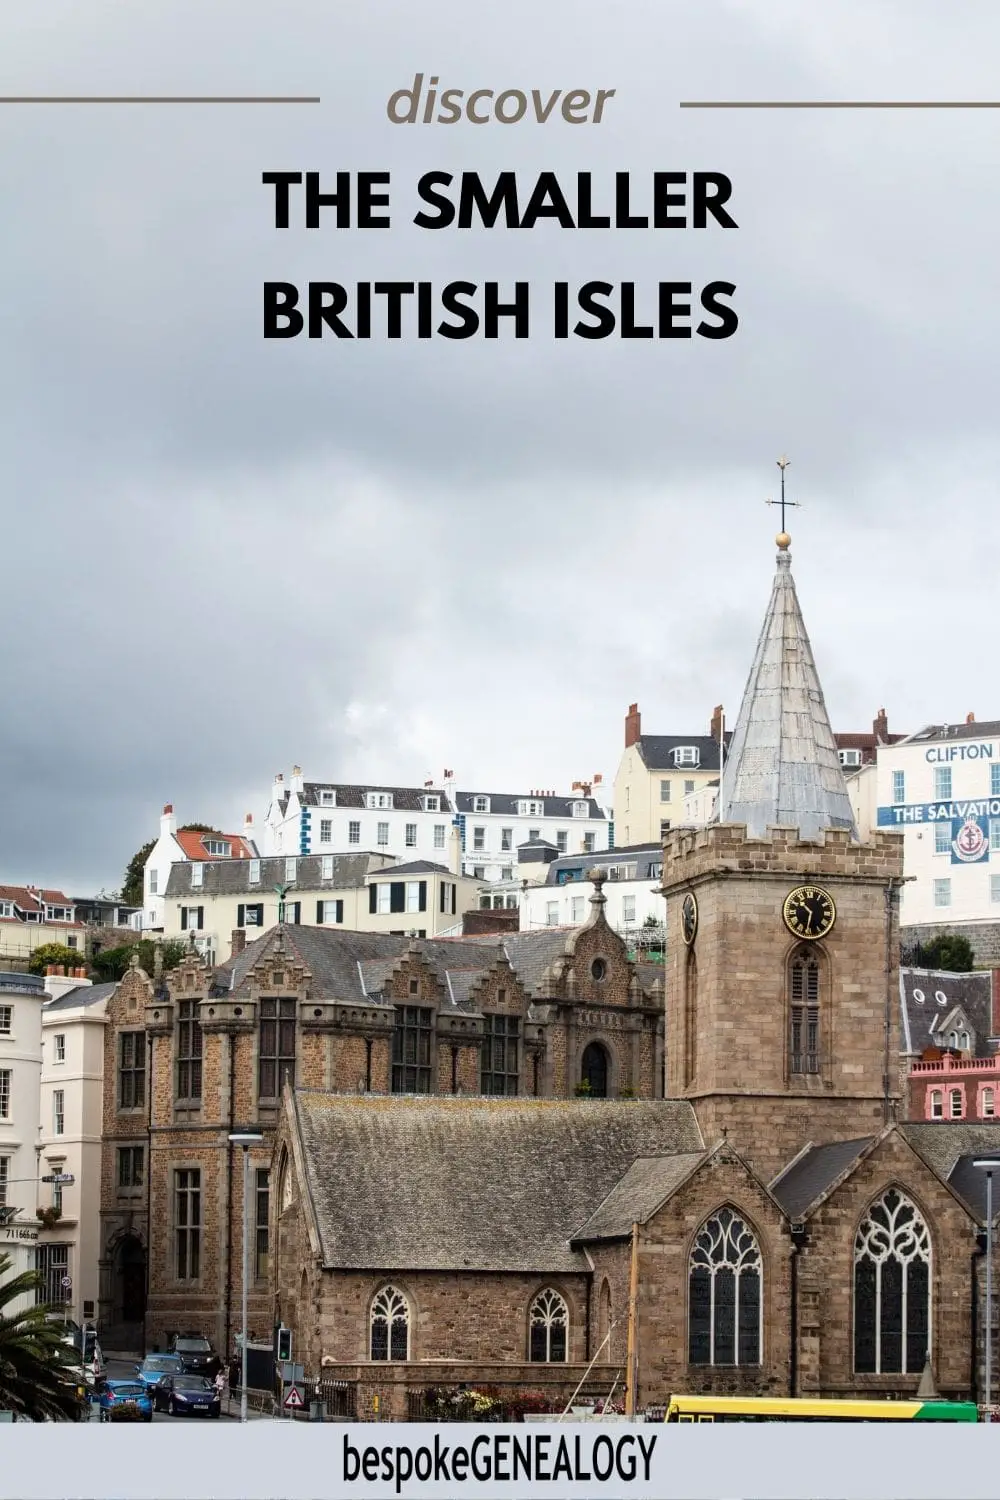 Discover the smaller British Isles. Photo of Guernsey Church and surrounding buildings.